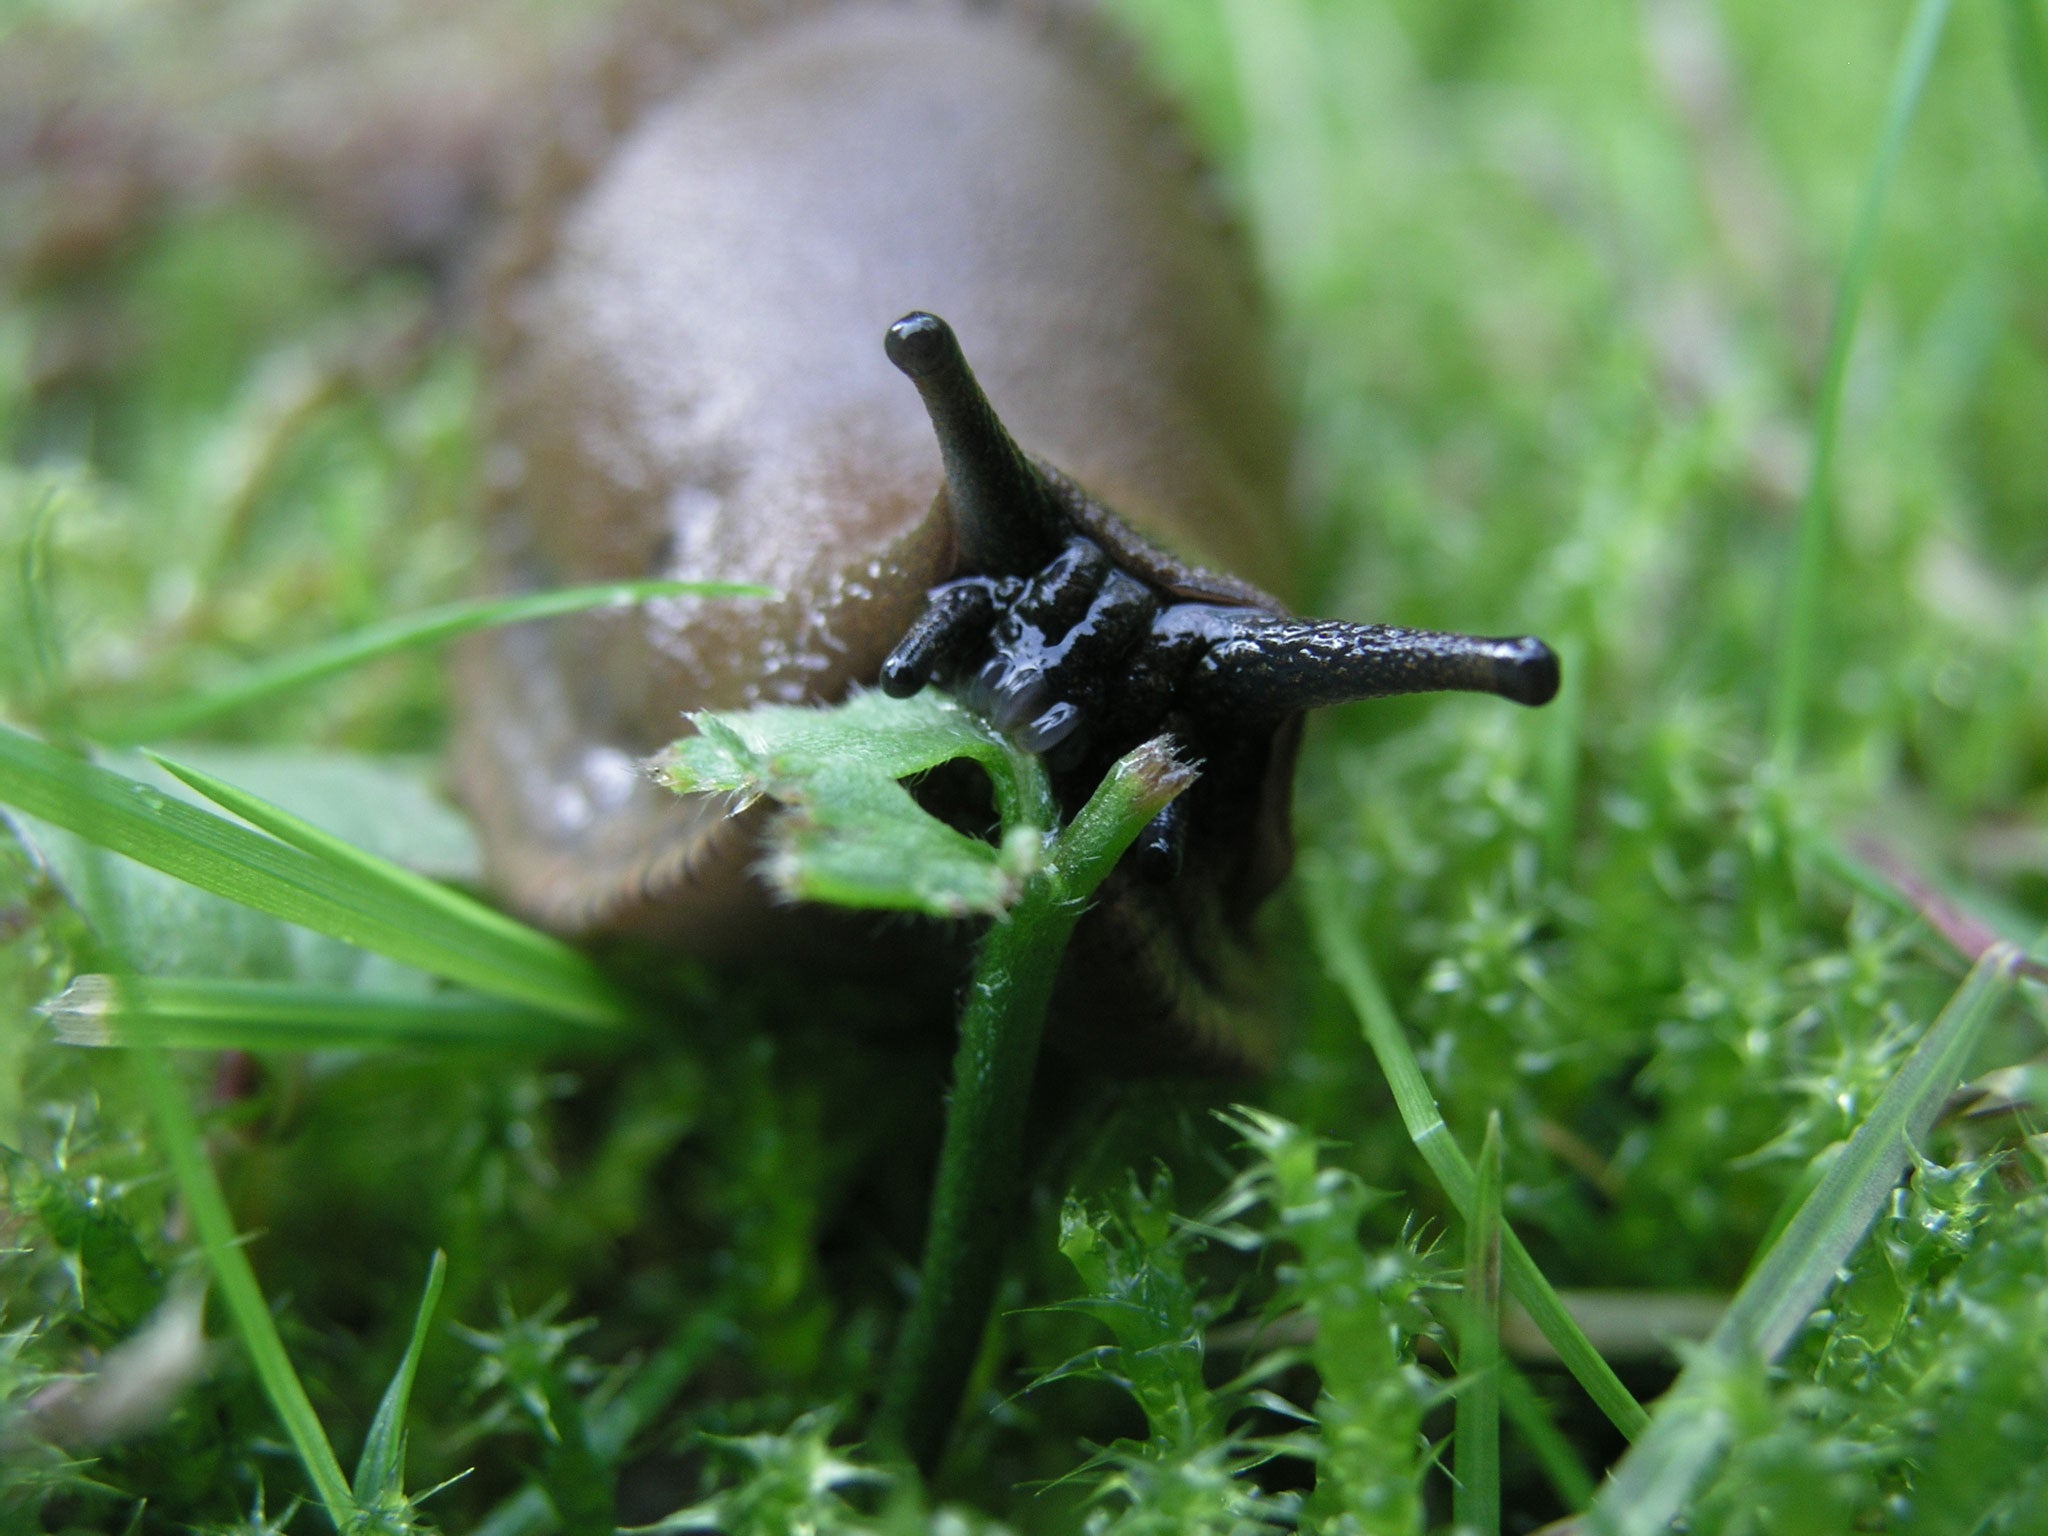 Slug it out: try natural pesticide alternatives or encourage hedgehogs or frogs into the garden (Hakan Svensson)